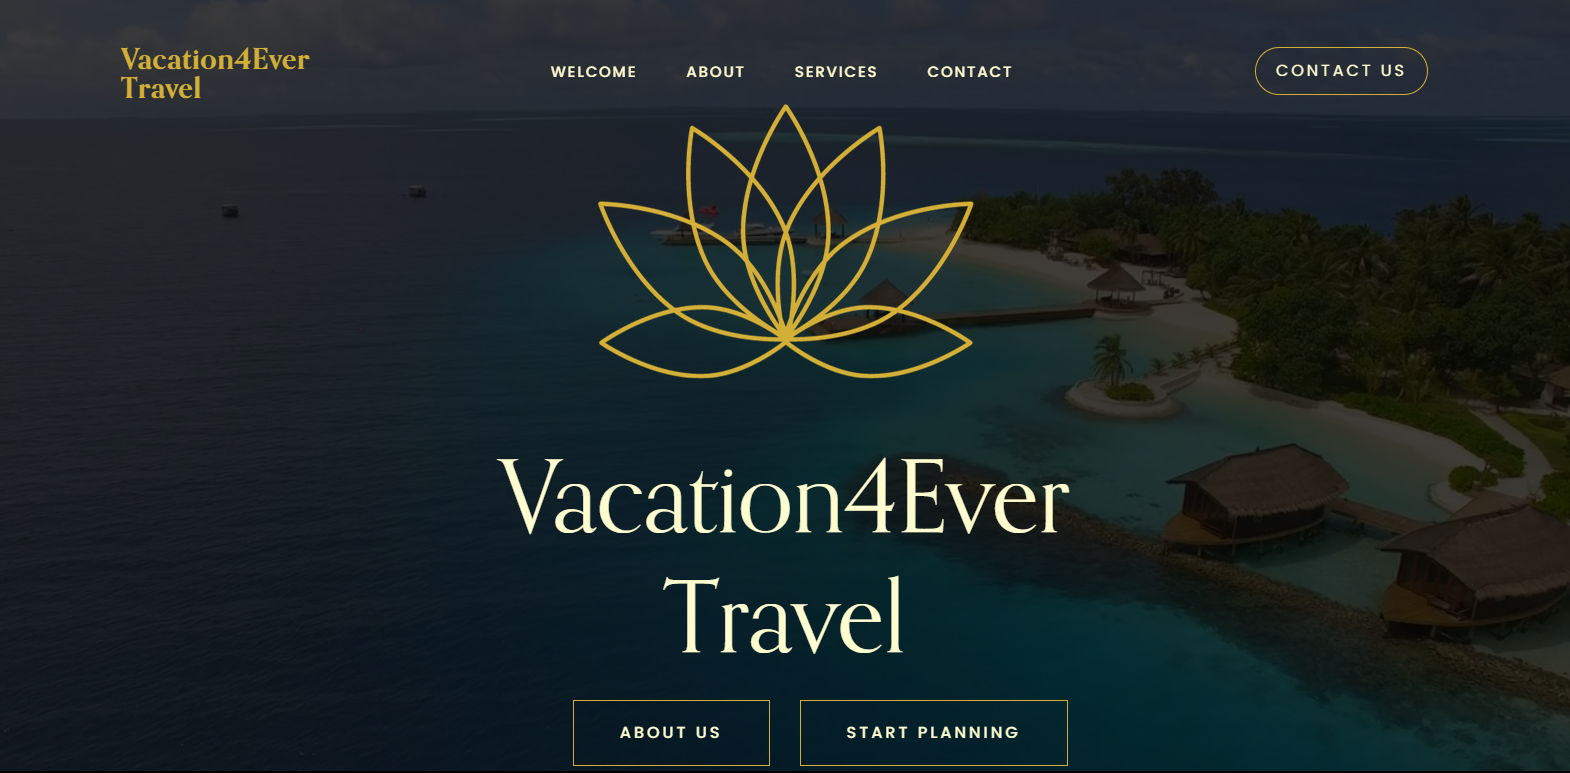 Vacation4Ever home page image